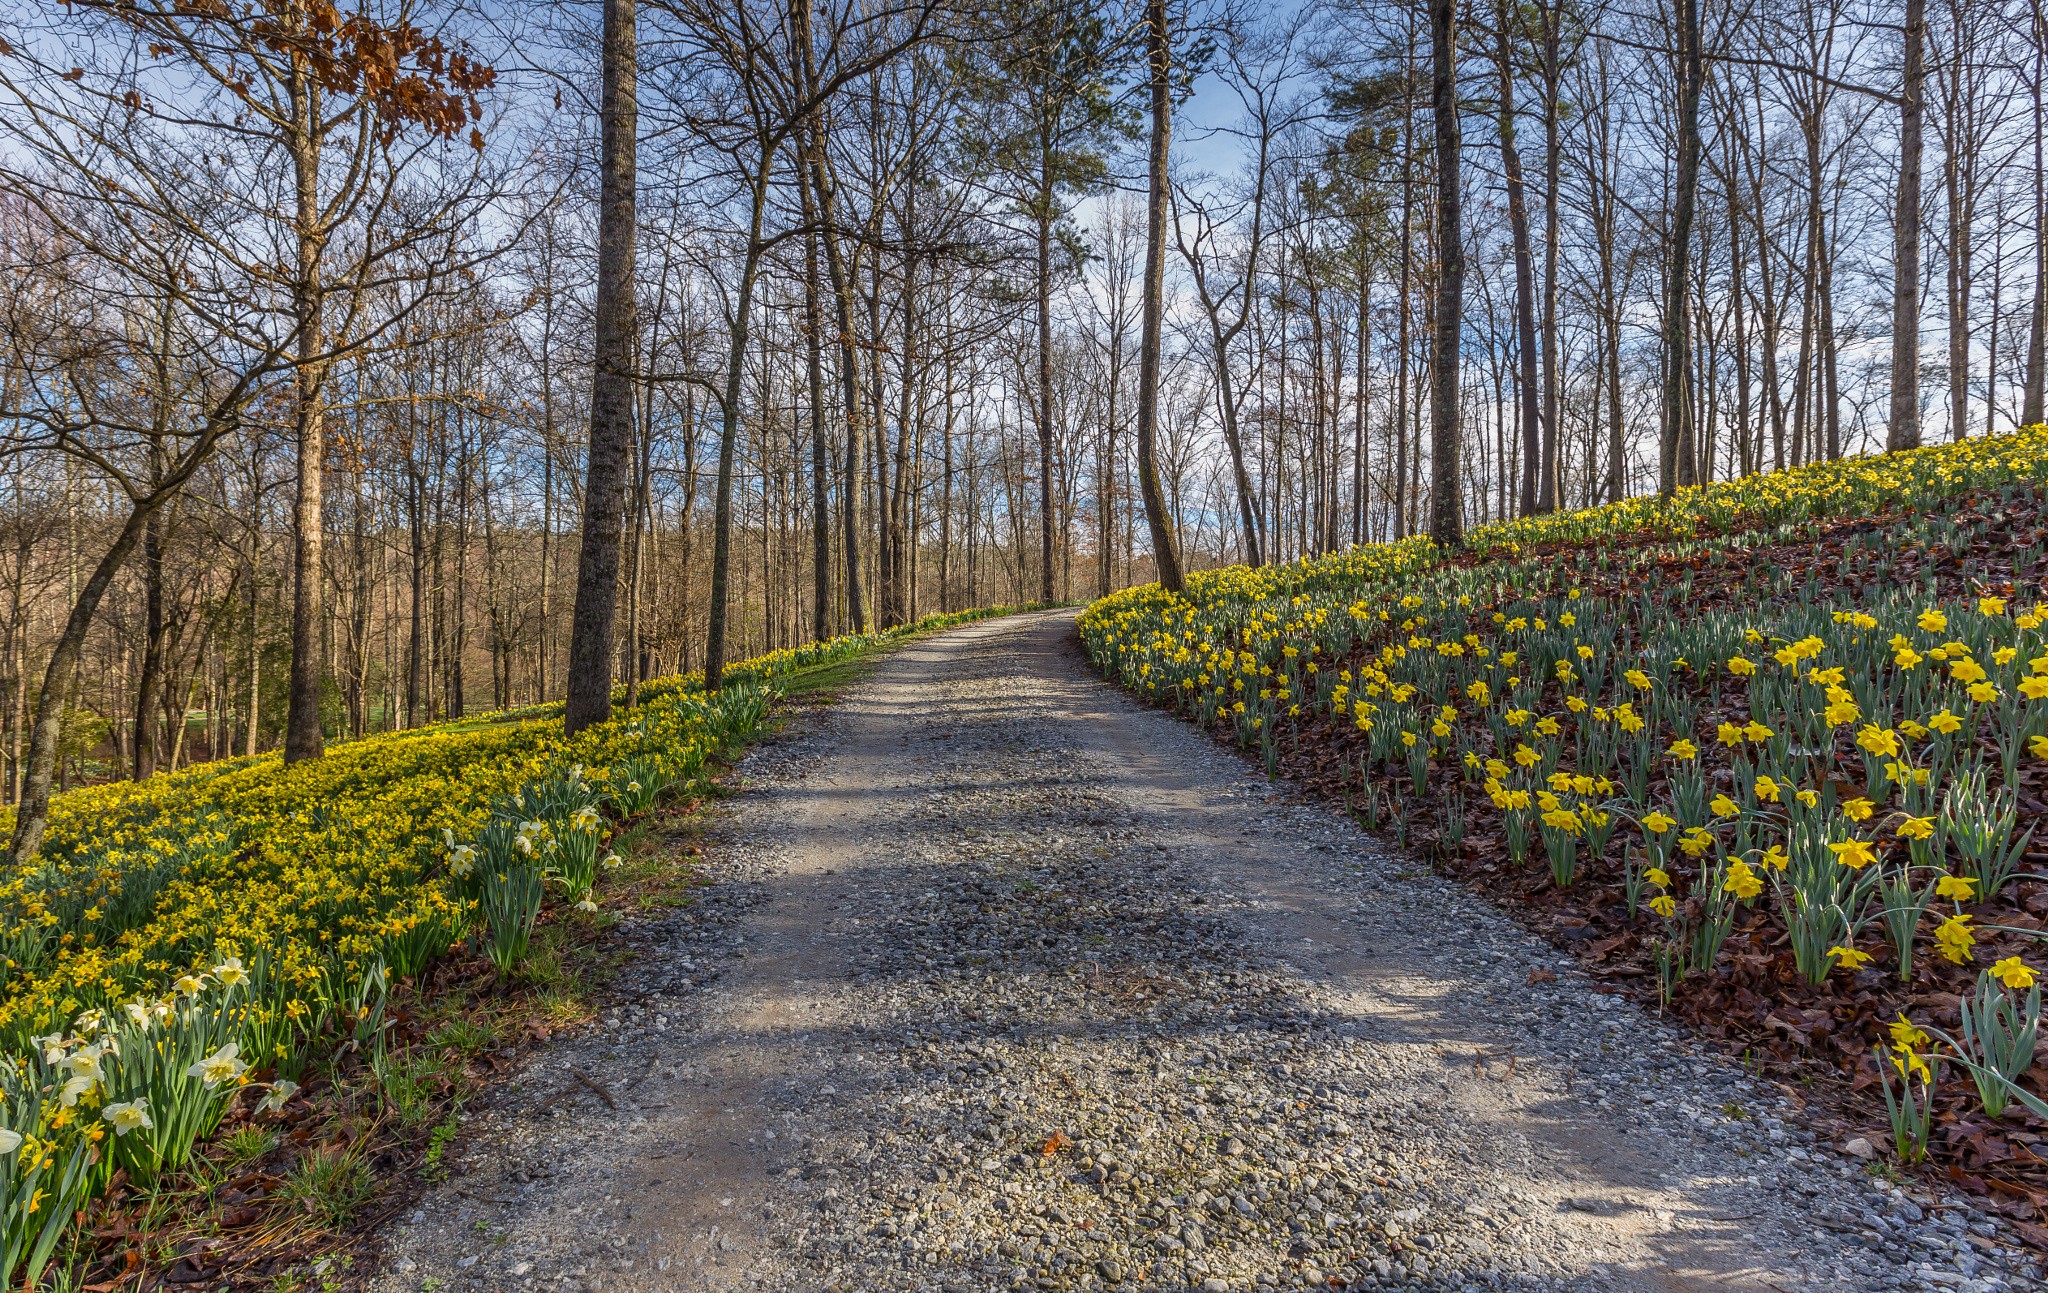 General 2048x1293 daffodils spring flowers yellow flowers dirt road outdoors plants